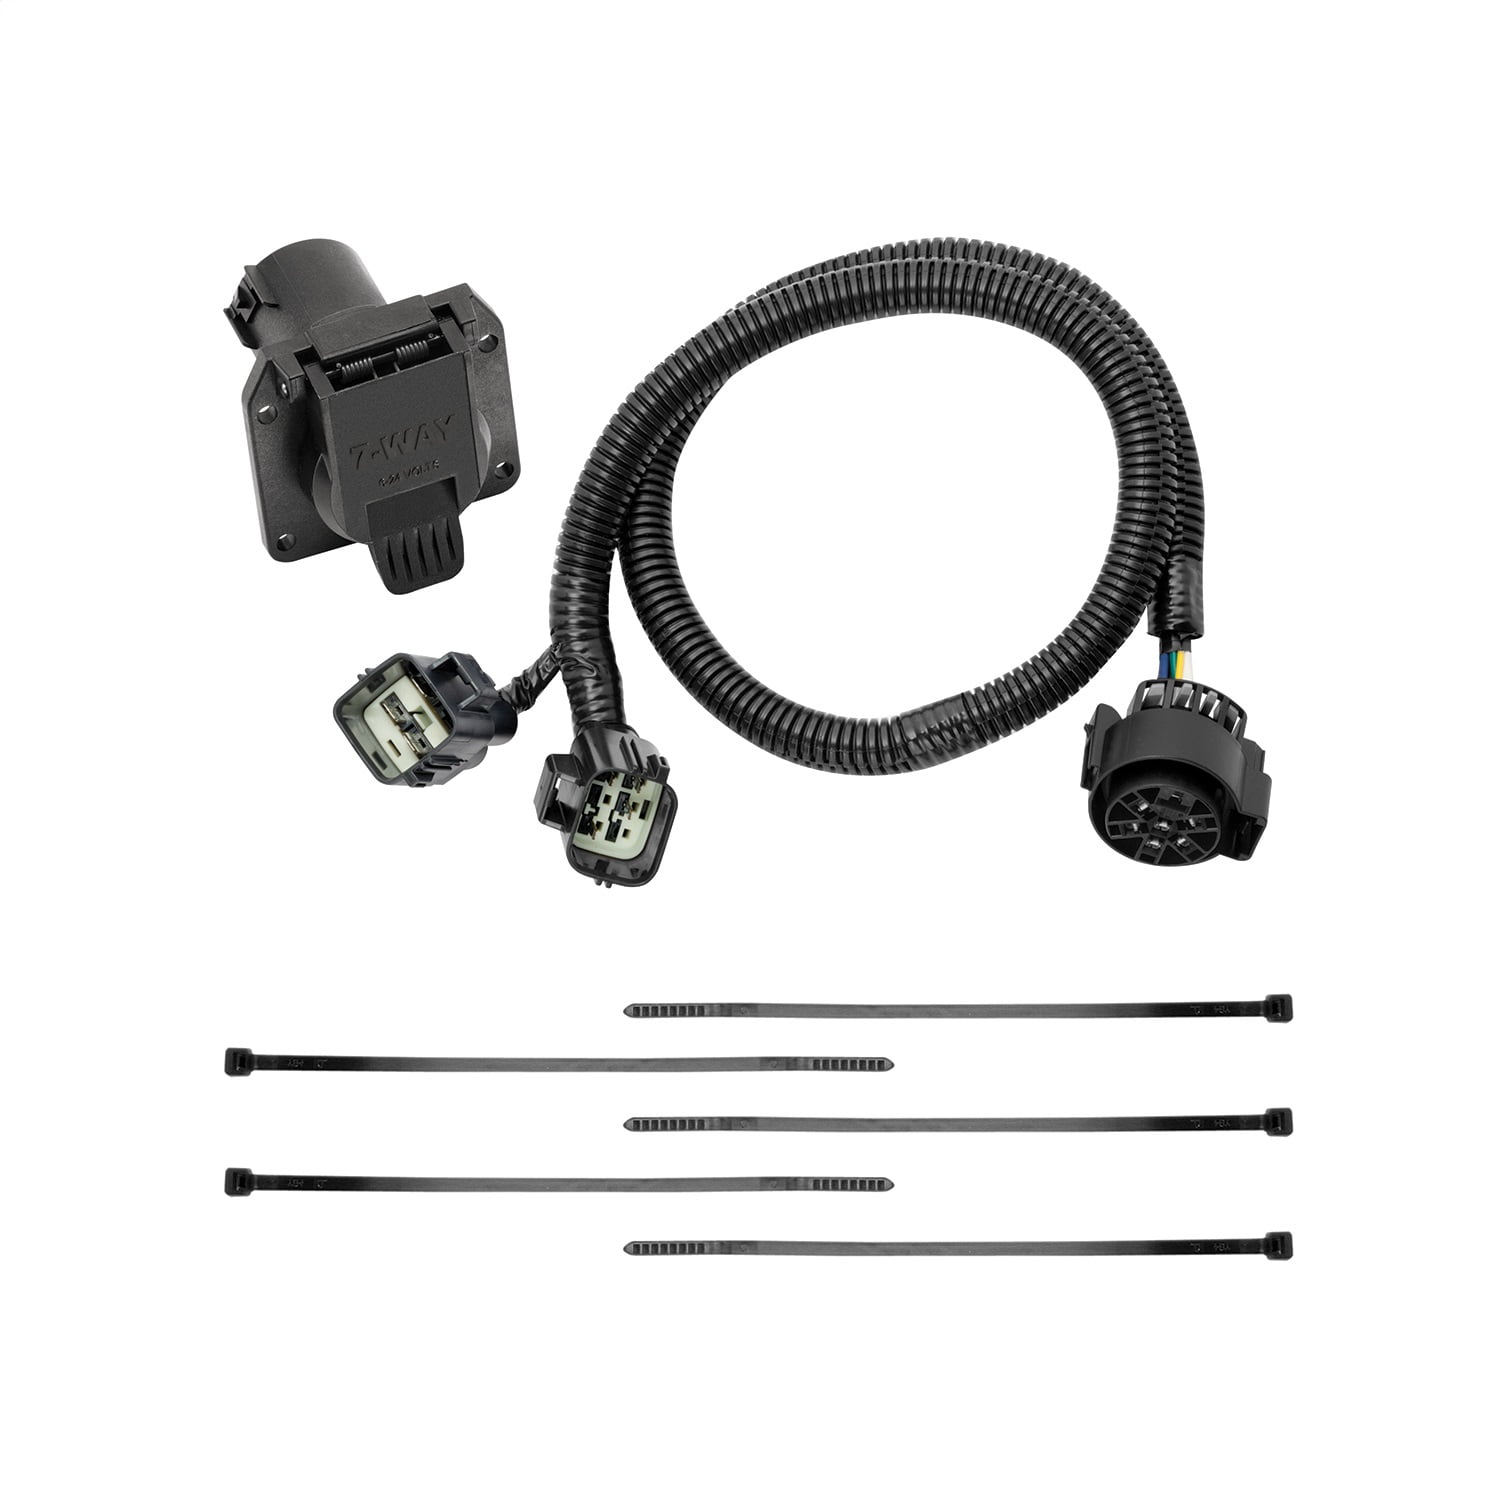 Tekonsha 118275 Tow Harness Wiring Package Fits 14 15 Range Rover Sport  Fits select: 2014-2022 LAND ROVER RANGE ROVER SPORT, 2015-2022 LAND ROVER  RANGE ROVER